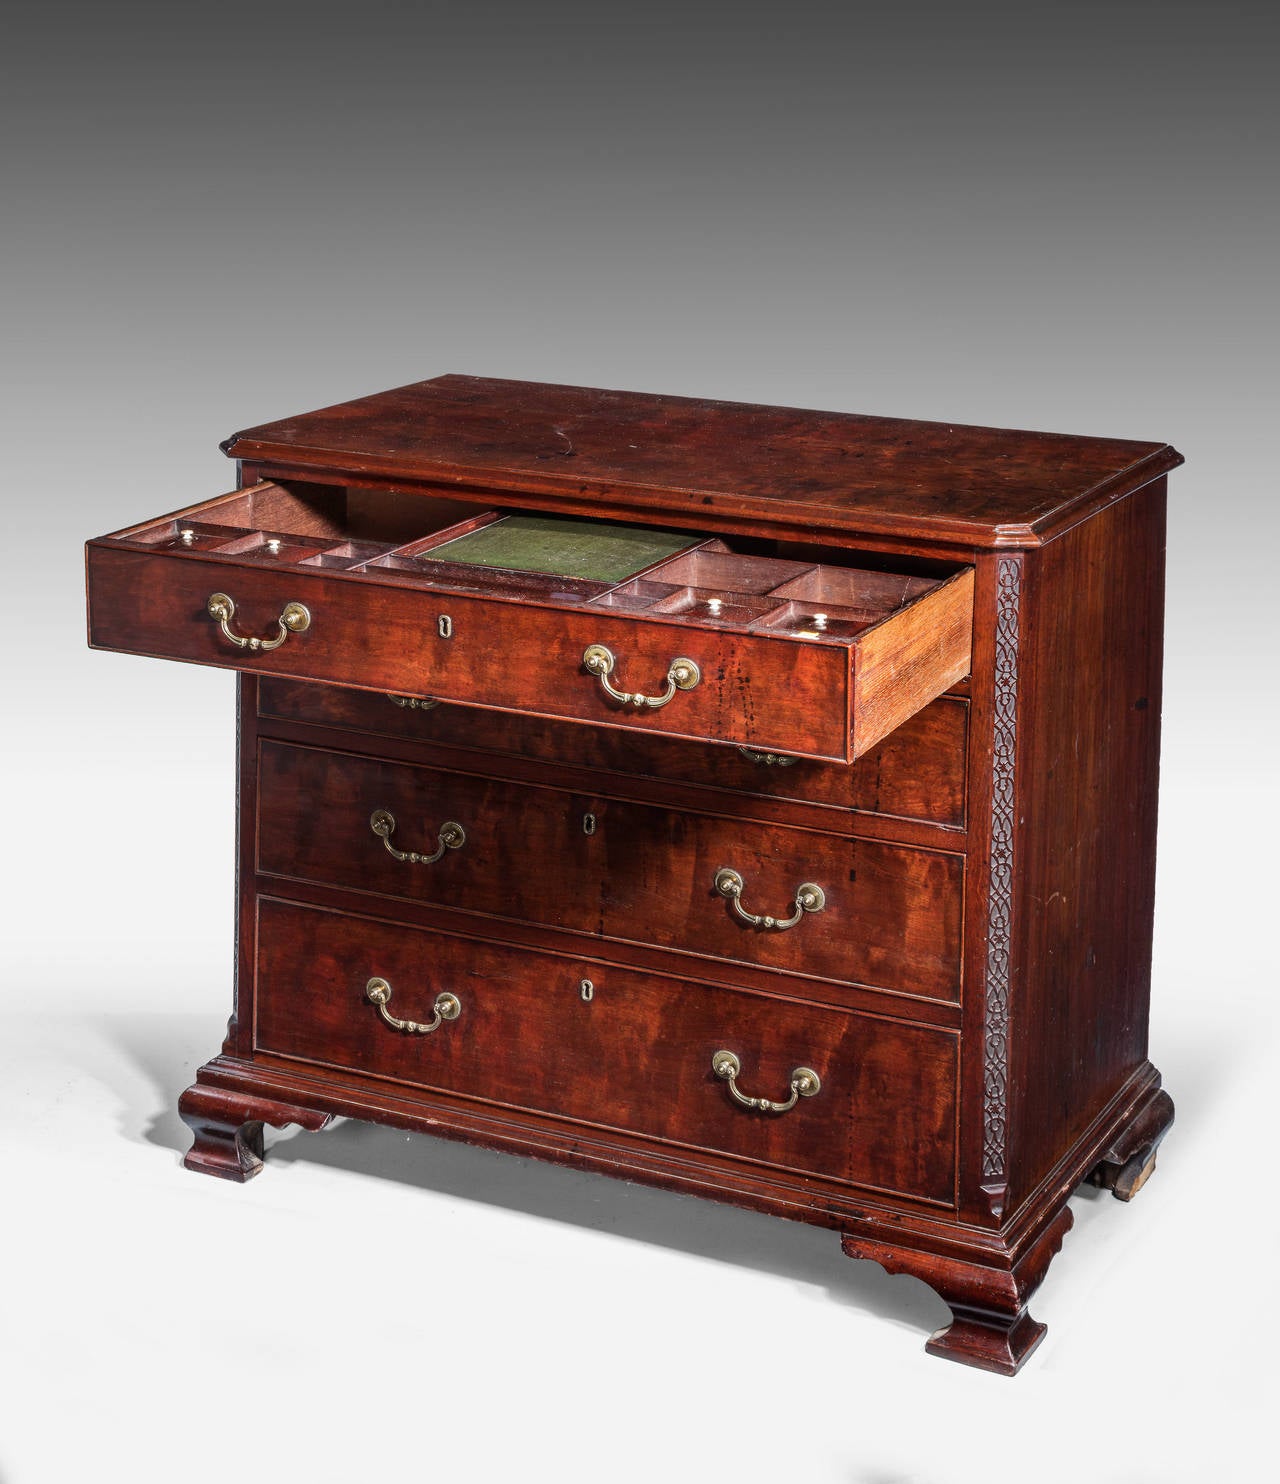 A Chippendale Period Mahogany Chest of Drawers, of very high calibre. The top drawer with fitments with Ivory termini. Cantered corners with very good blind fret carving. Richly figured timbers with good cast swan neck handles. The whole standing on